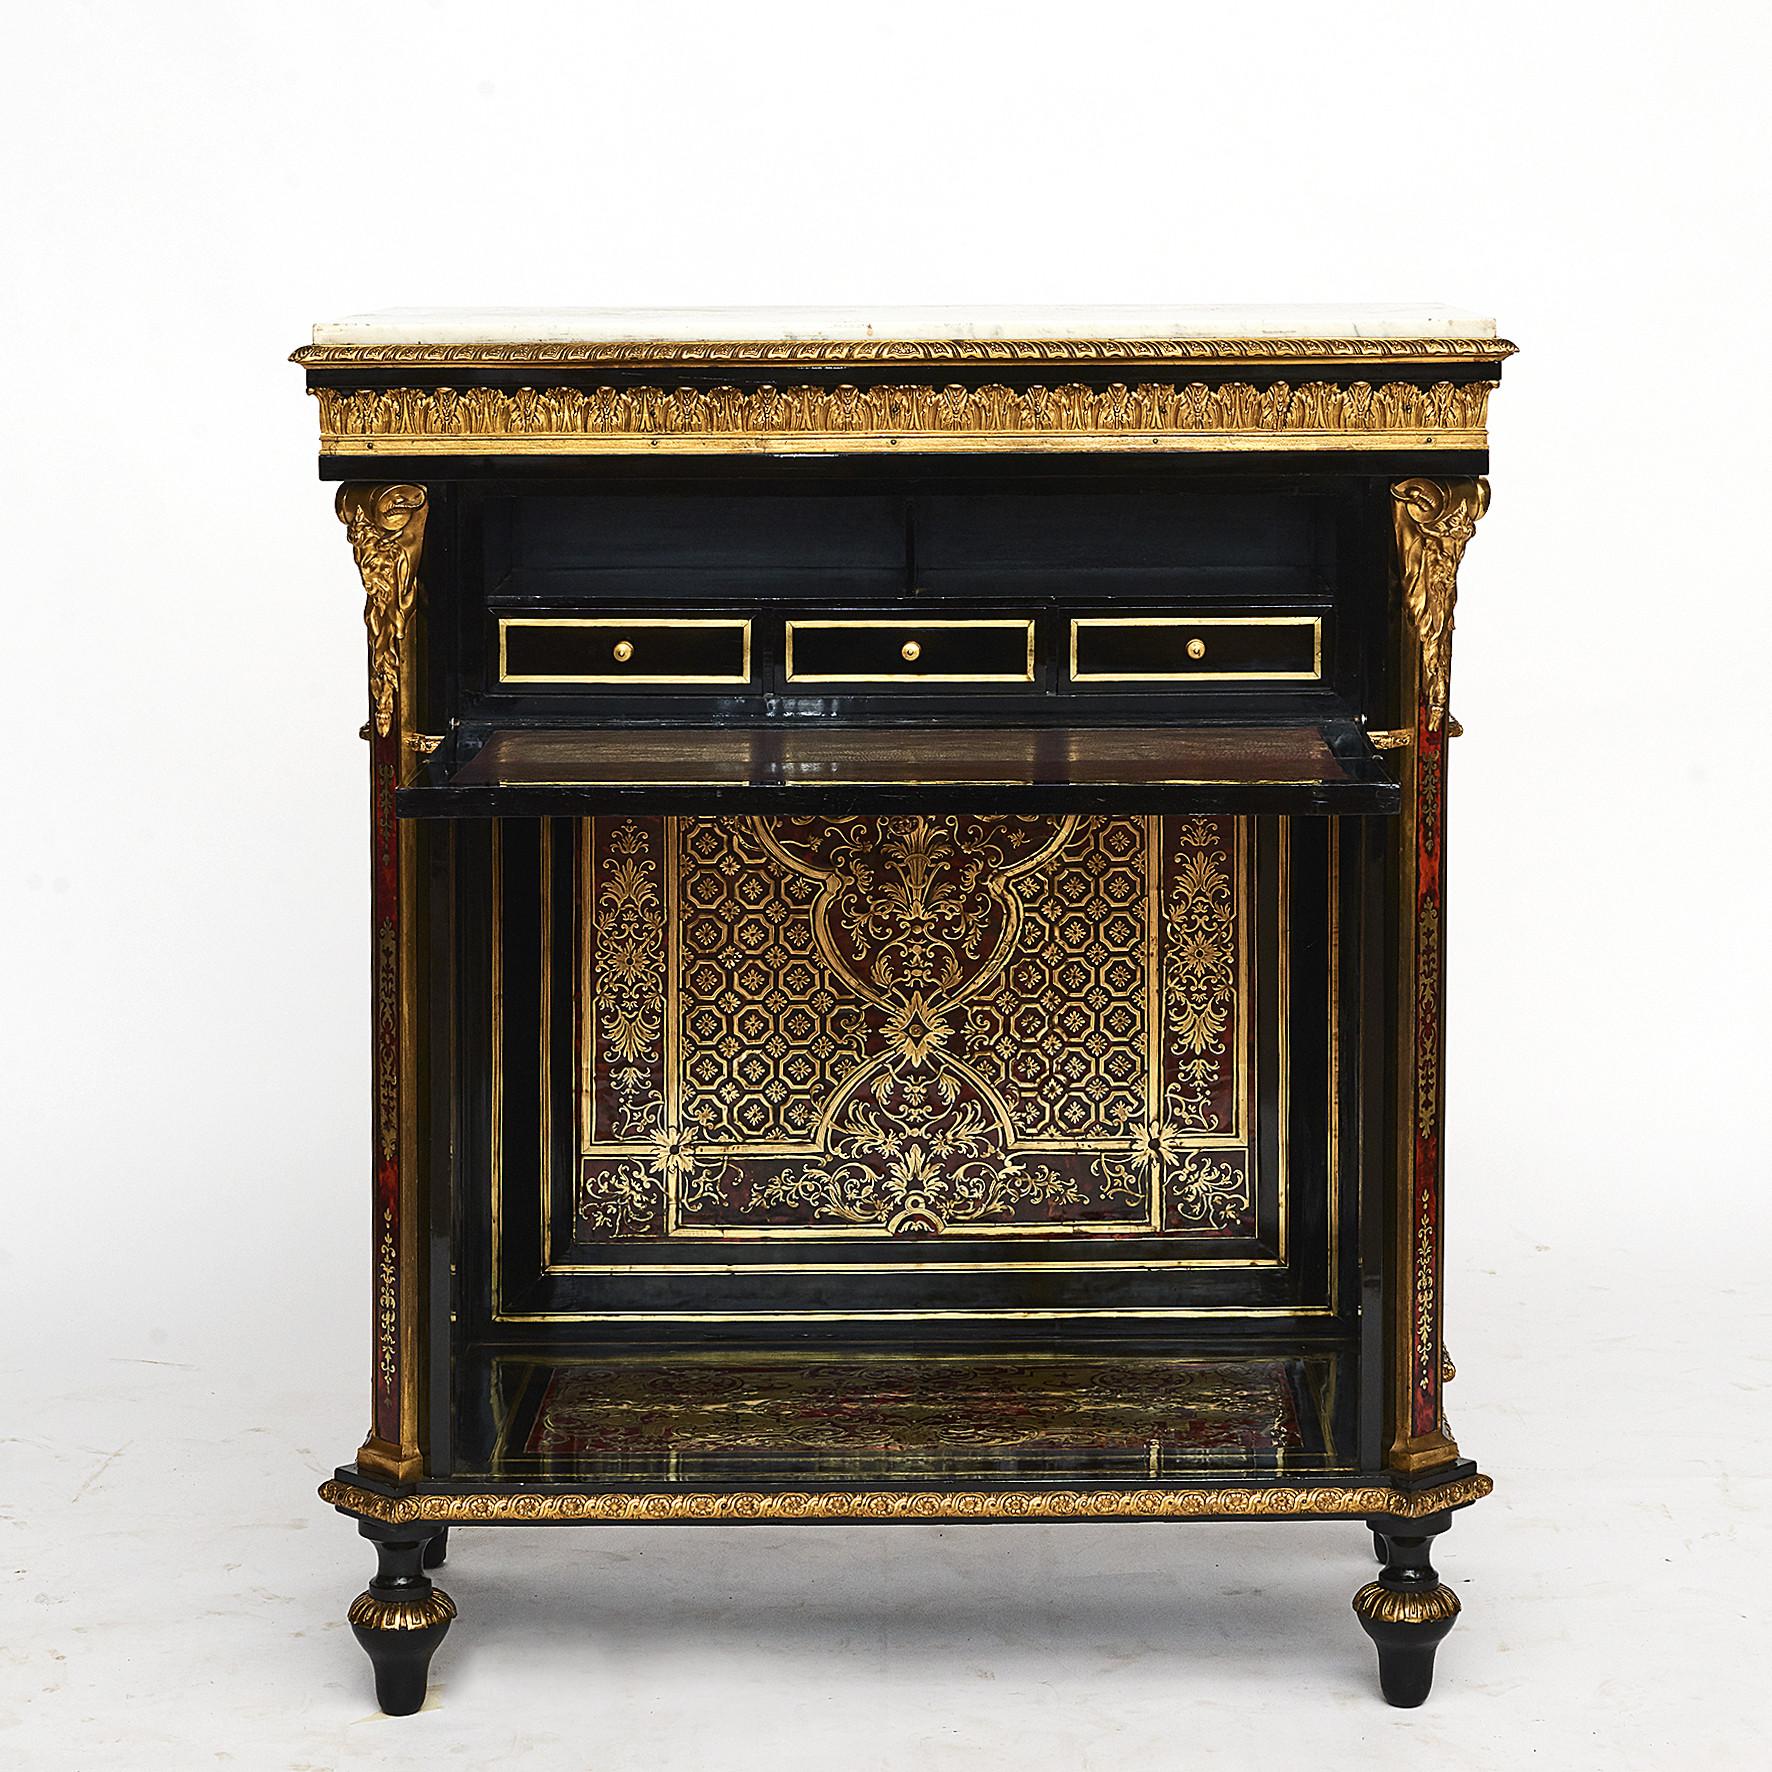 19th century French Napoleon III console table.
Ebonized pear-tree wood with Boulle style red-orange tortoiseshell and brass Marquetry, ormolu detailing and marble top. The detailed and interconnected designs include figures of monkeys, birds and